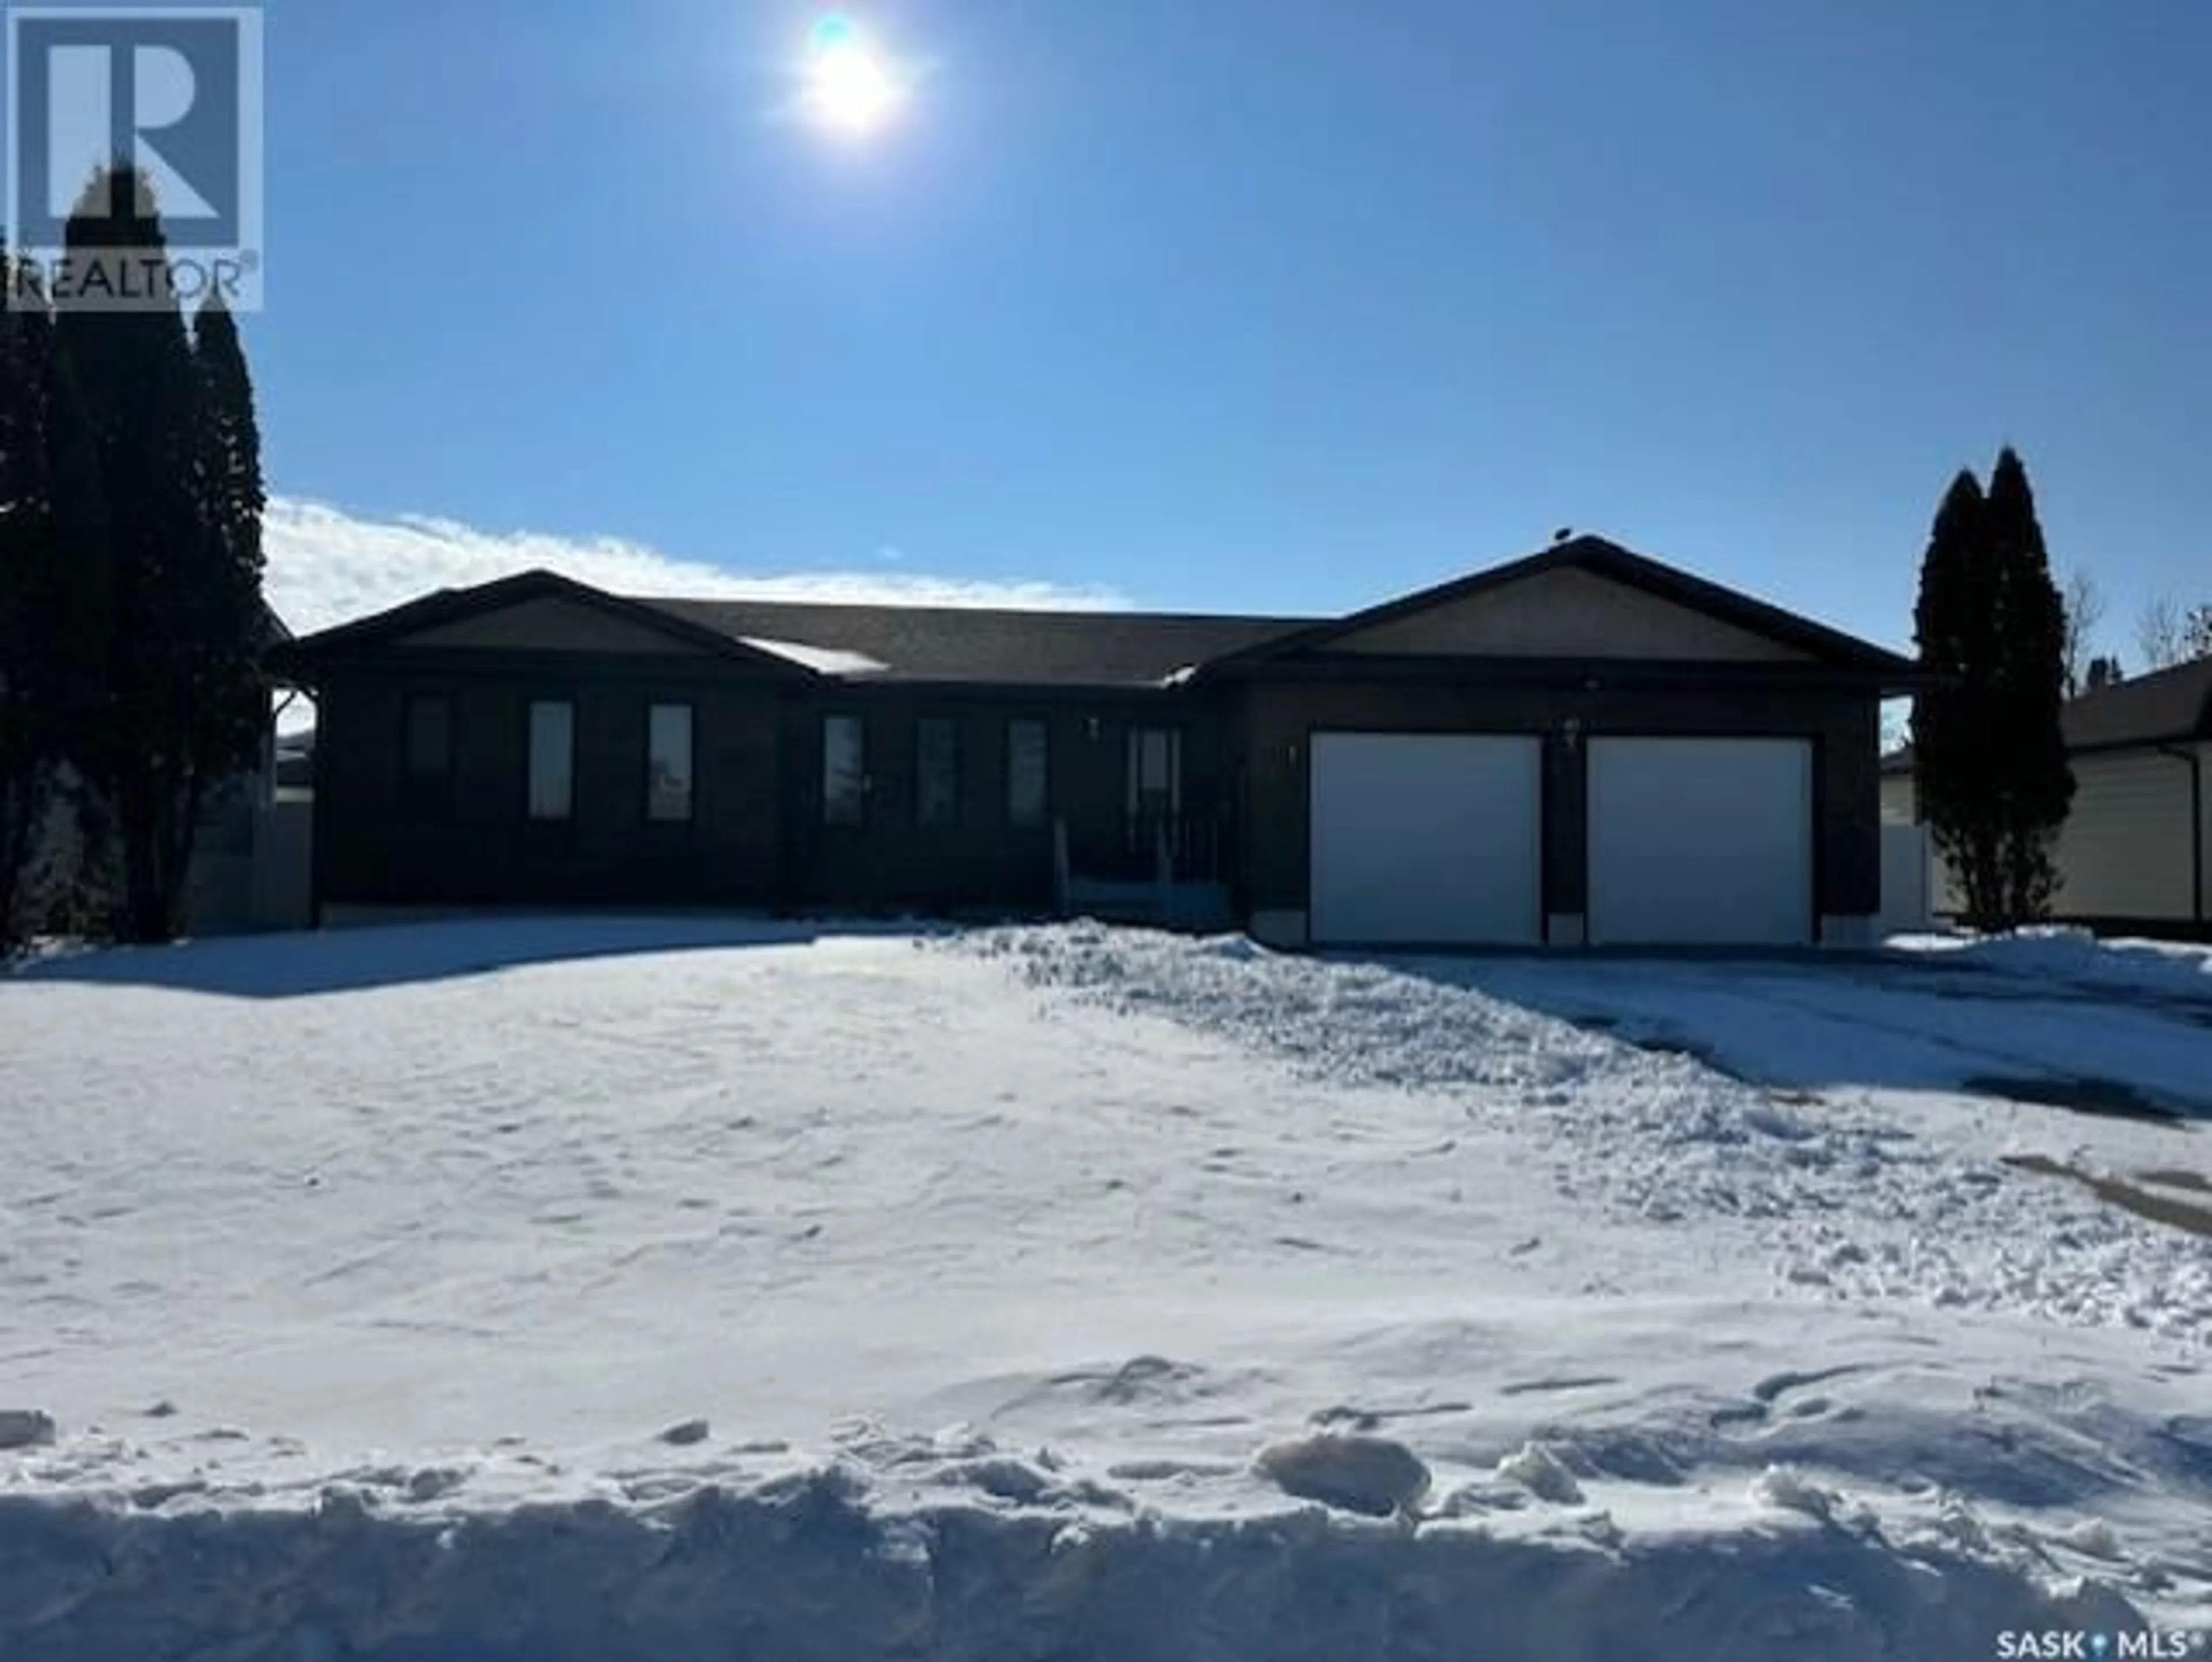 Home with unknown exterior material for 531 10th AVENUE W, Melville Saskatchewan S0A2P0